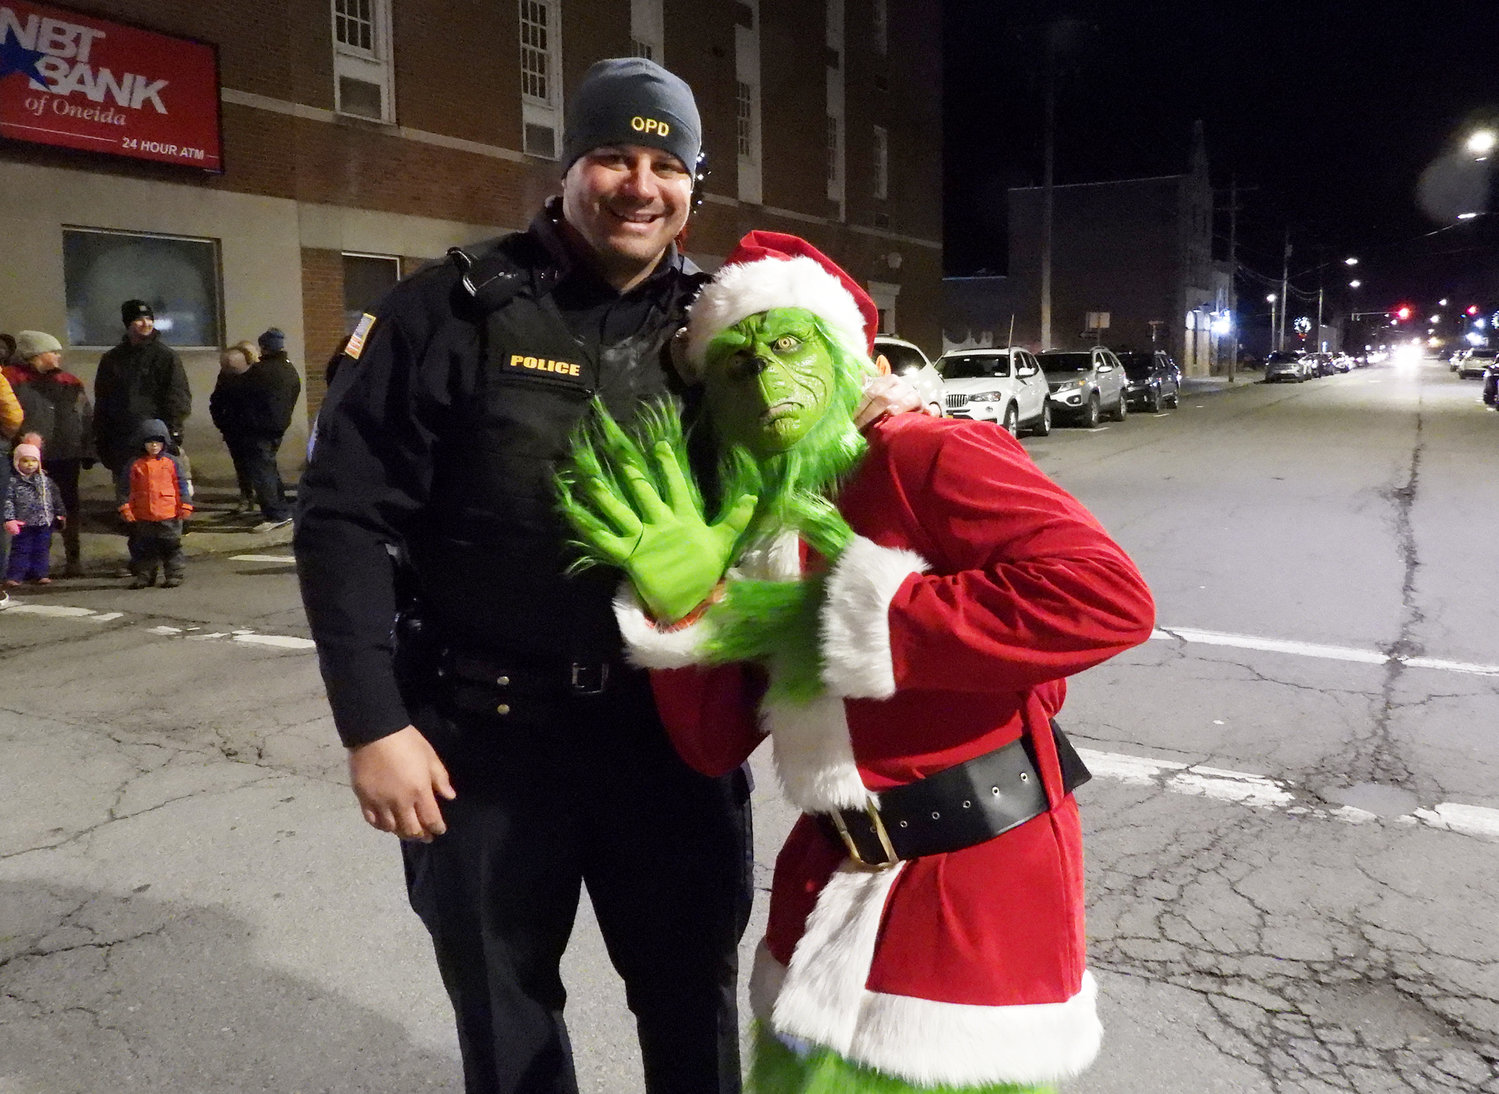 MAKING FRIENDS WITH THE GRINCH — Sergeant David Meeker Jr. finds the Grinch walk the streets of Oneida before the inaugural Parade of Lights. For more photos of the Oneida Christmas Festival, visit the Rome Sentinel website.